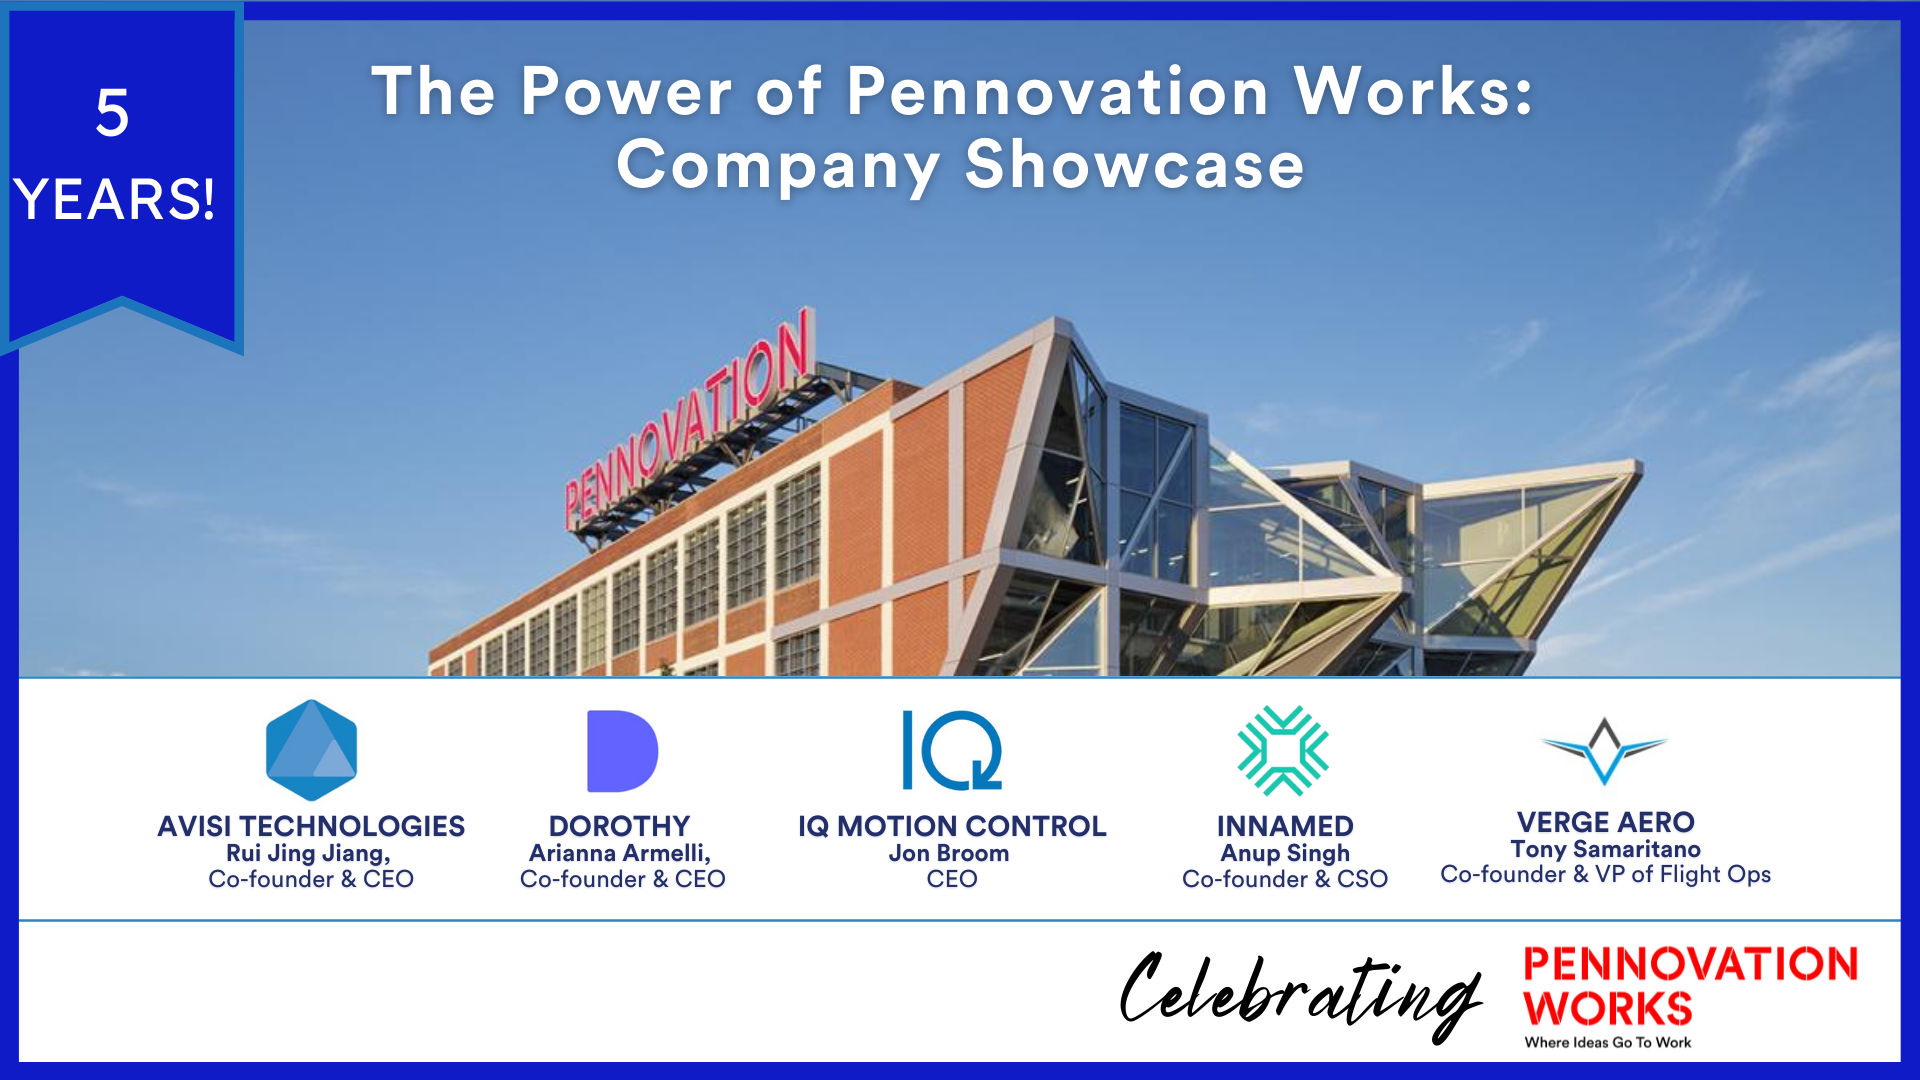 The Power of Pennovation Works: Company Showcase Recap graphic